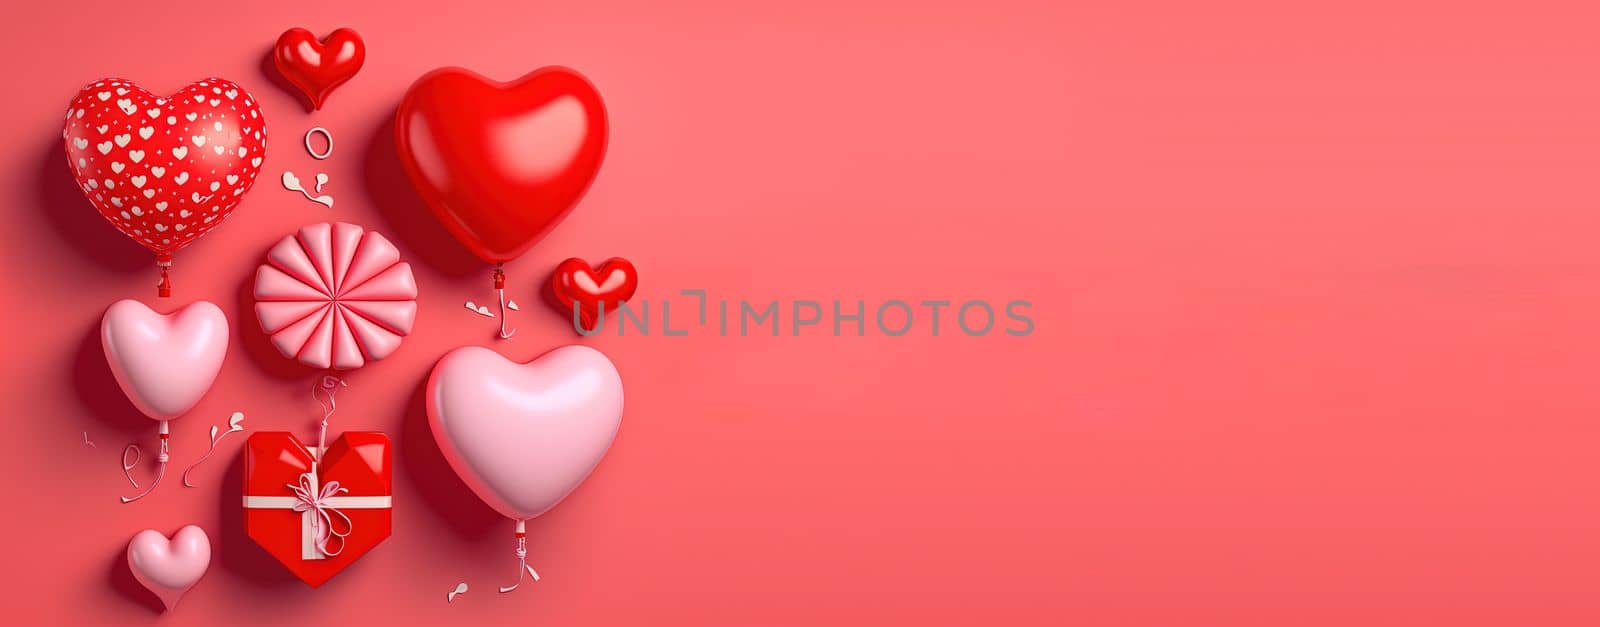 Valentine's day background and shiny 3d heart shape with small ornament for banner by templator